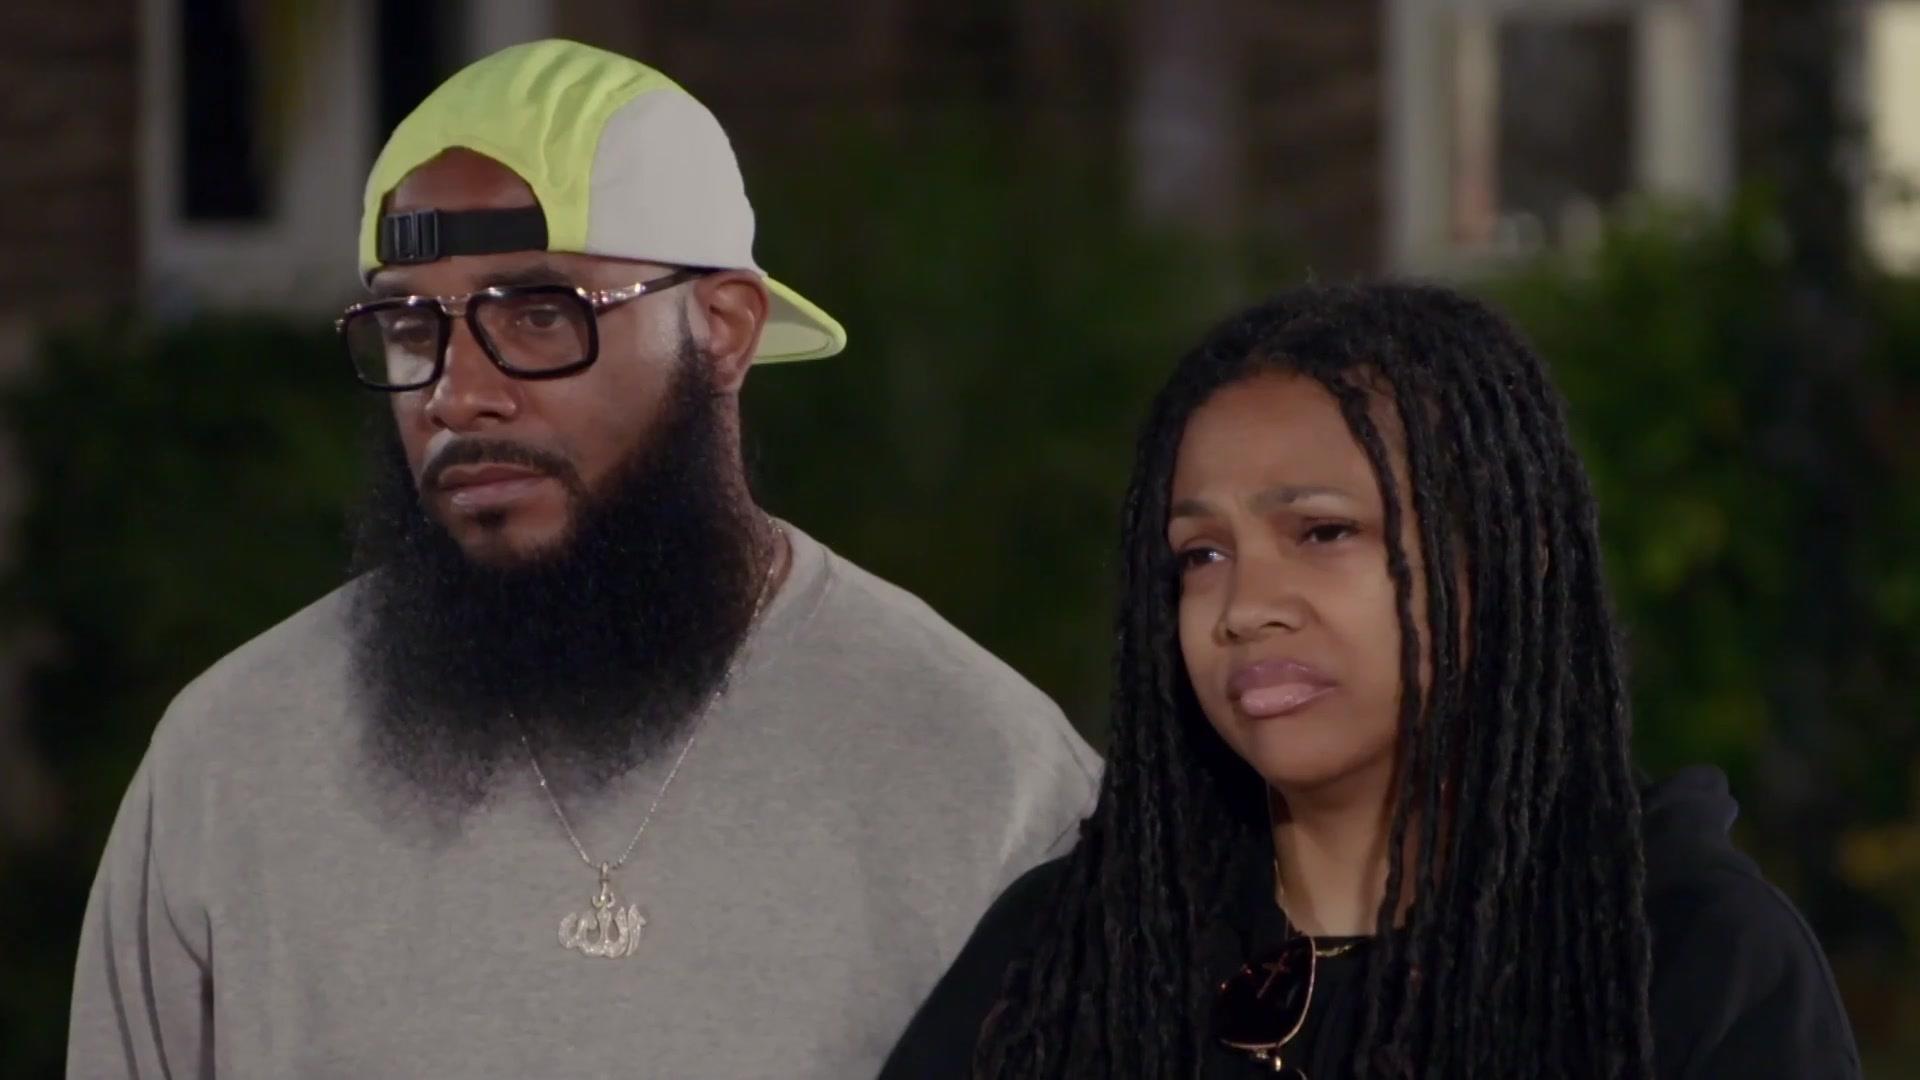 Sneak Peek: #HipHopBootCamp Hits Another Level!